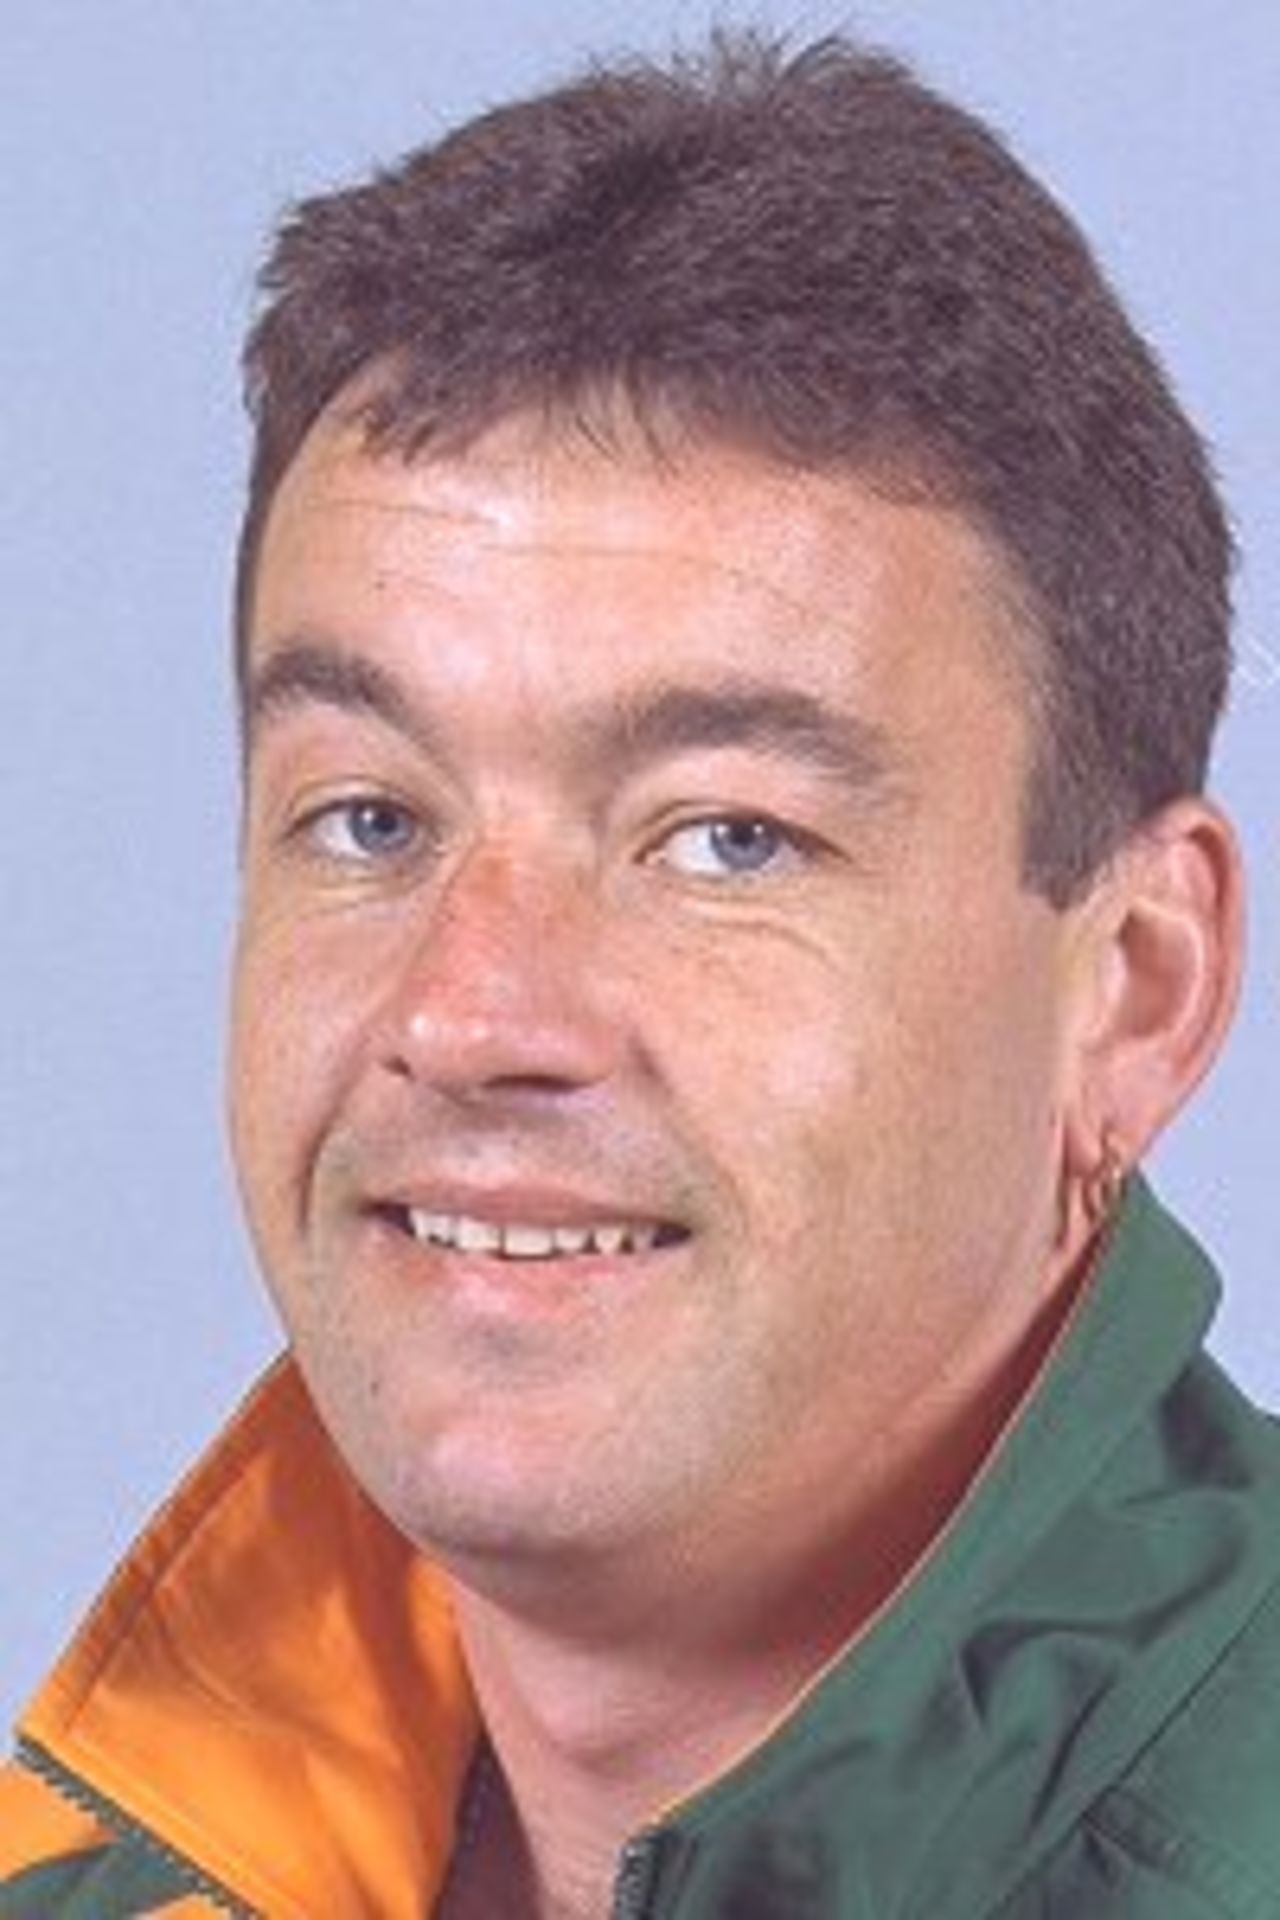 Portrait of Shaun Young, September 2000